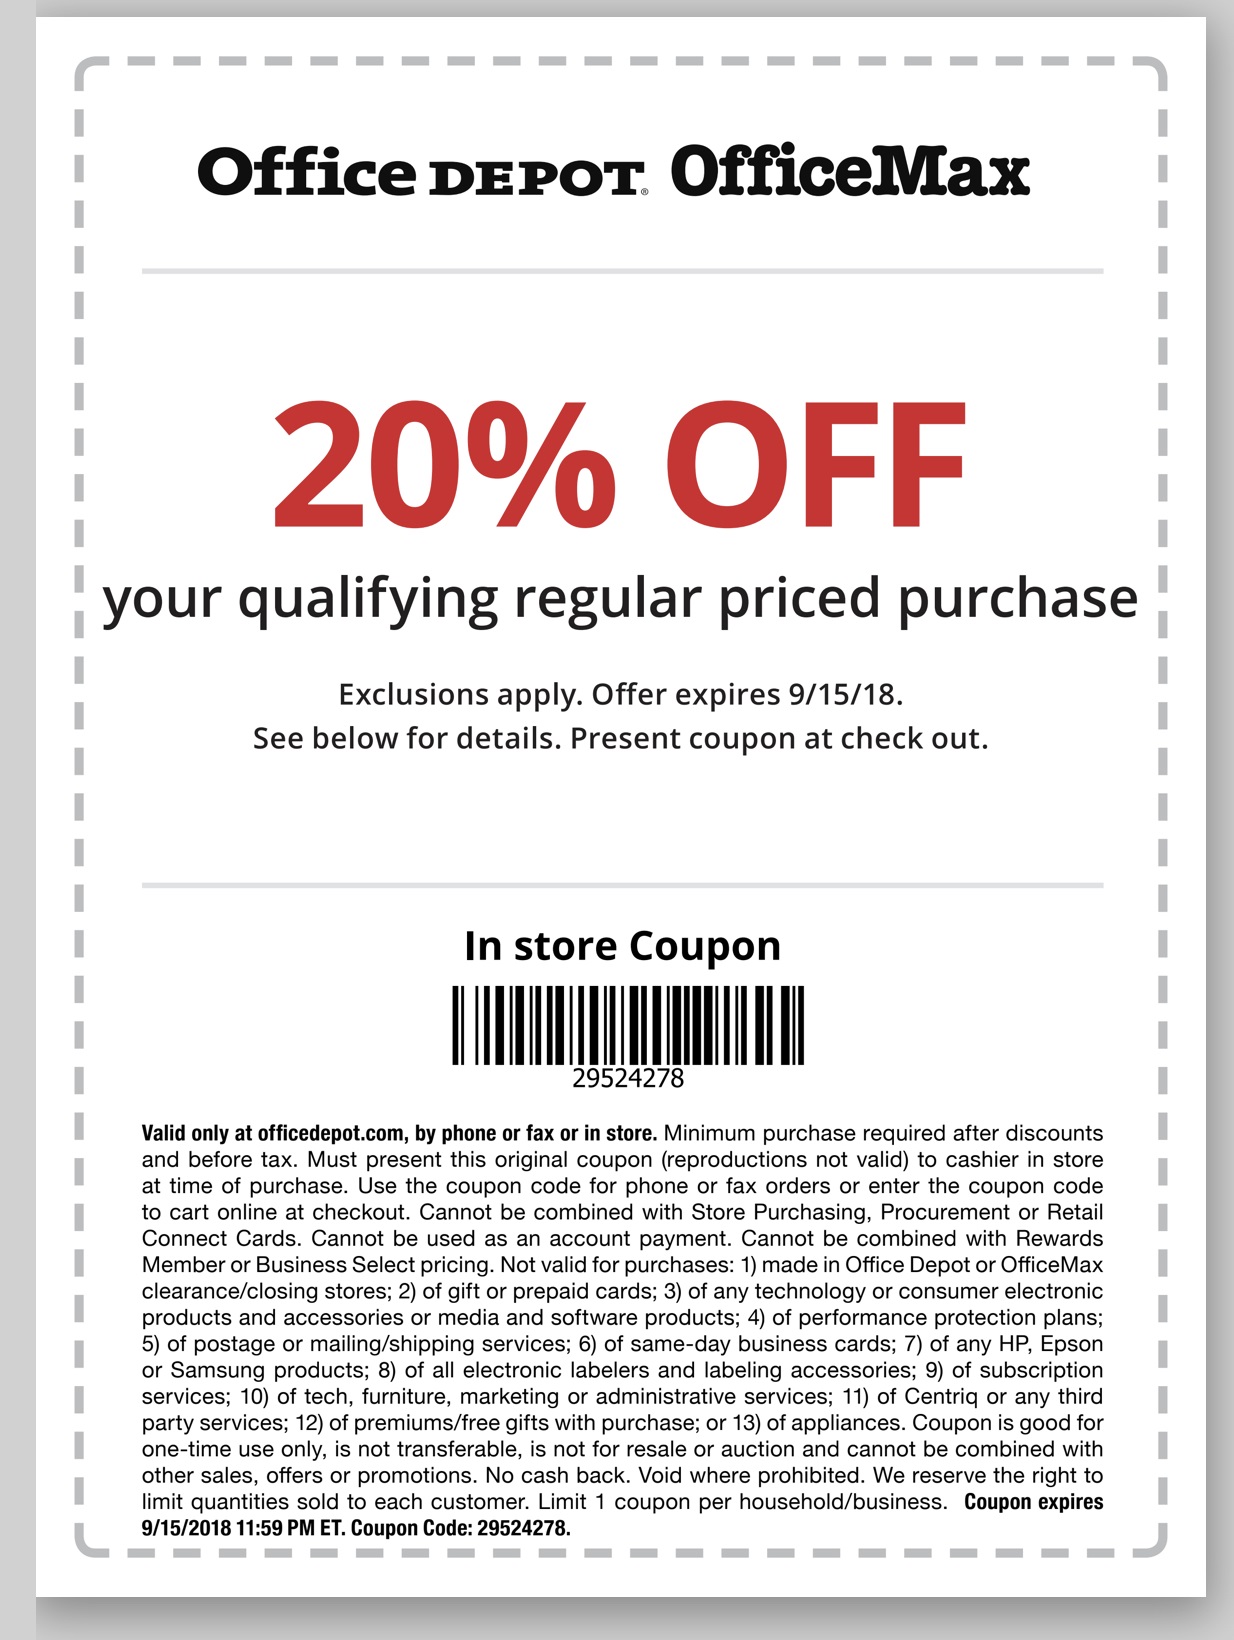 Office Depot Office Max 20 Off Regular Priced Item In Store